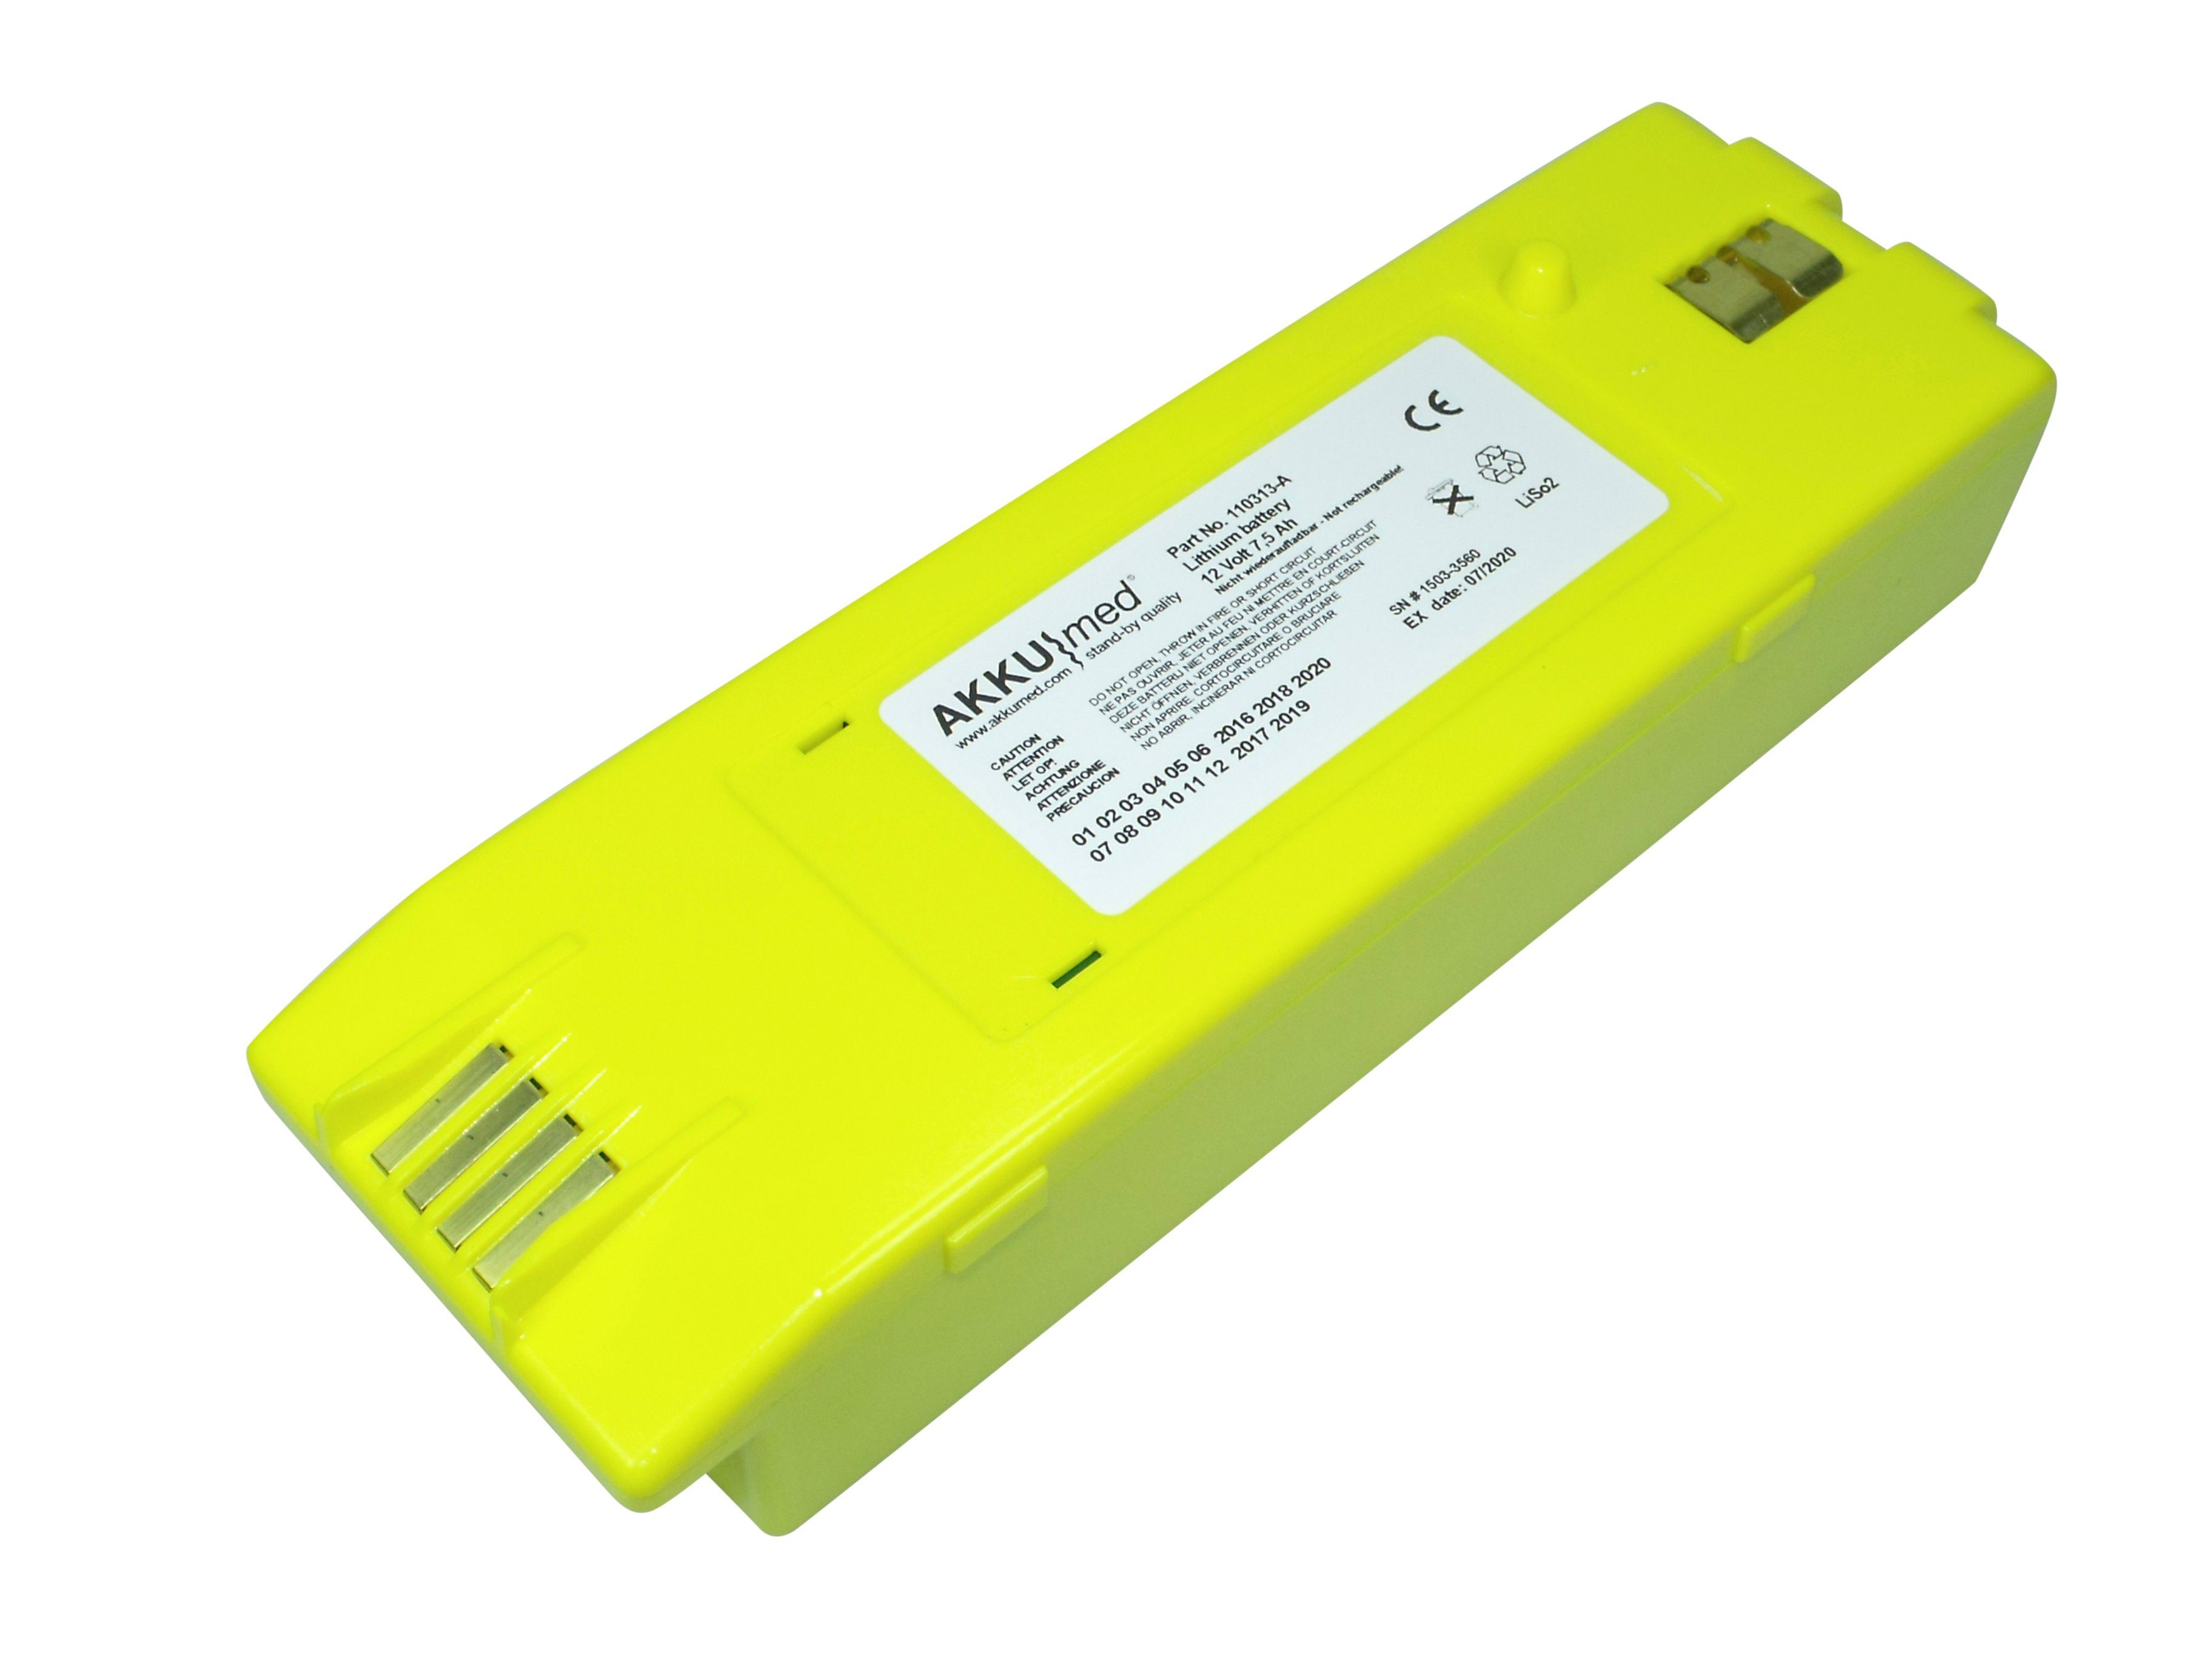 AccuCell Lithiumbatterie passend für Cardiac Science PowerHeart AED G3 - Typ 9 Akku 7500 mAh (12,0 V)